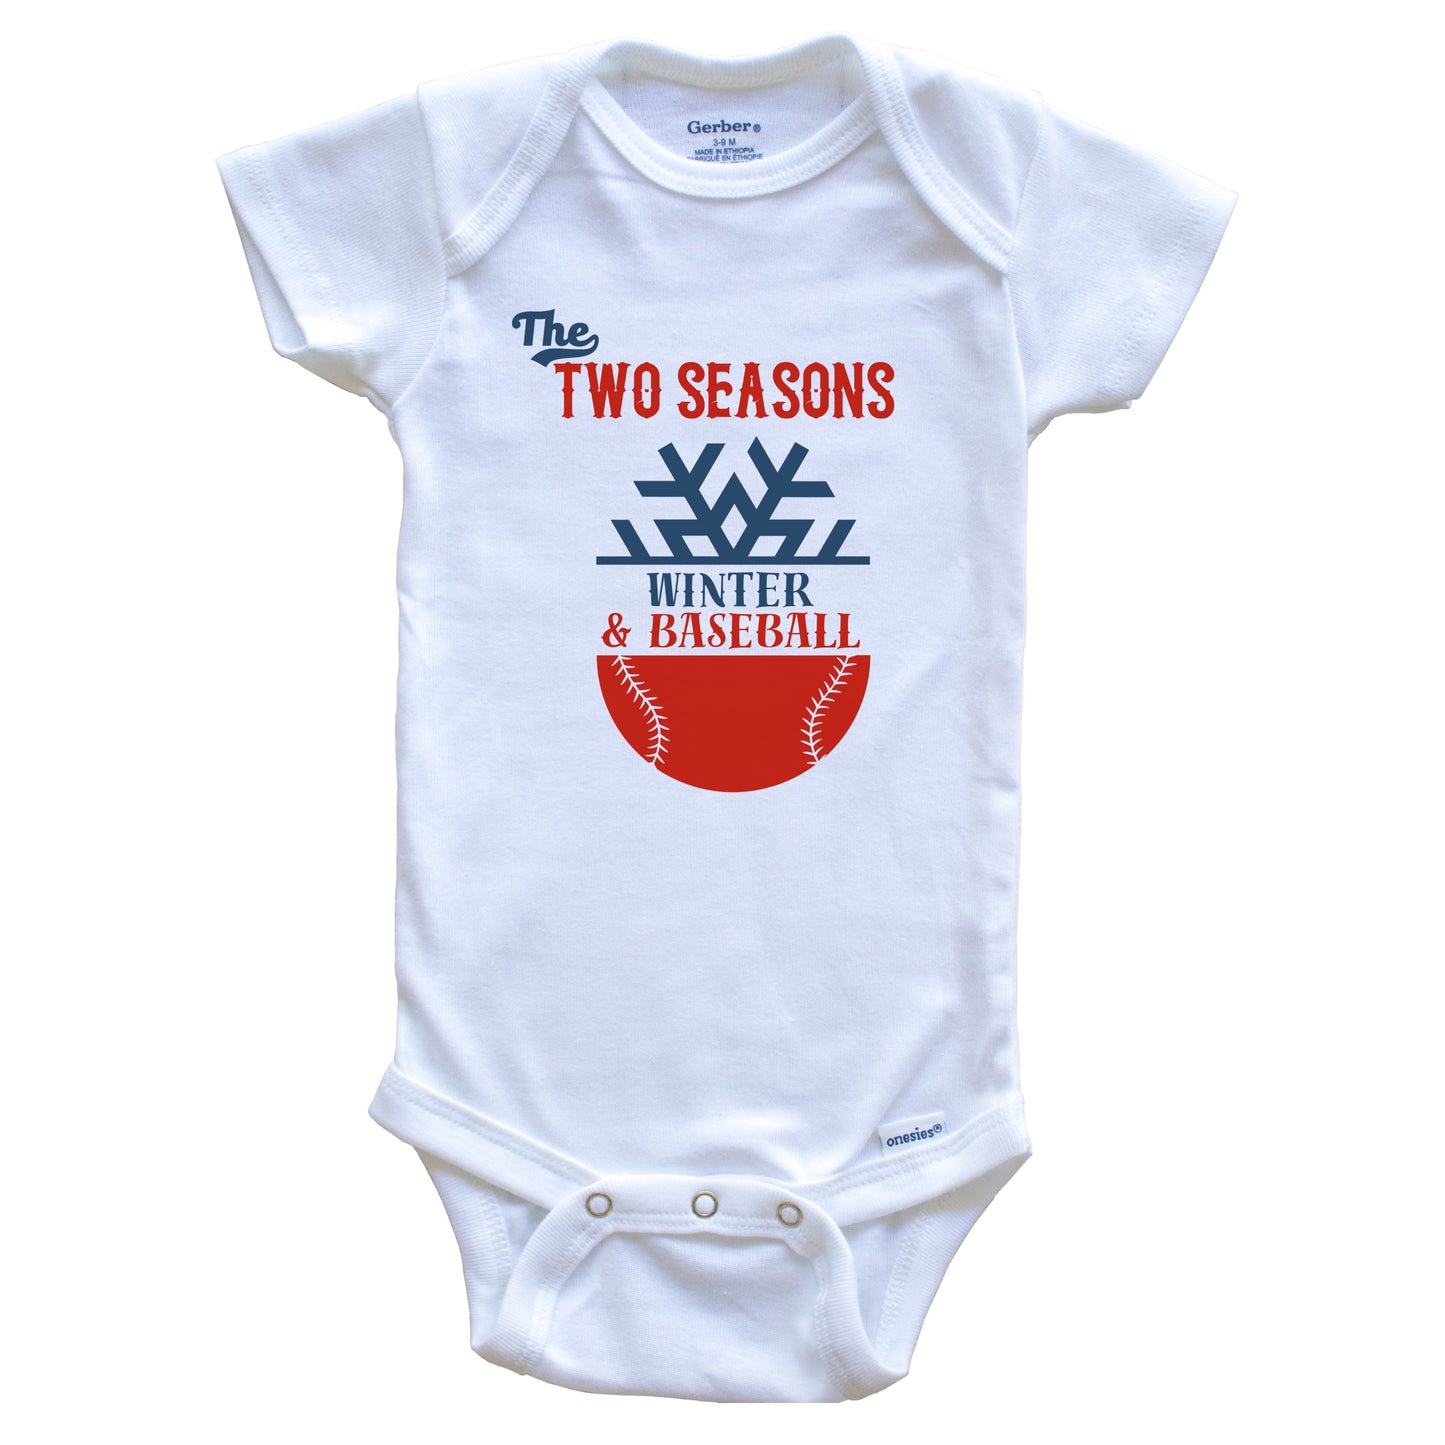 Toronto Maple Leafs Baby Clothing, Maple Leafs Infant Jerseys